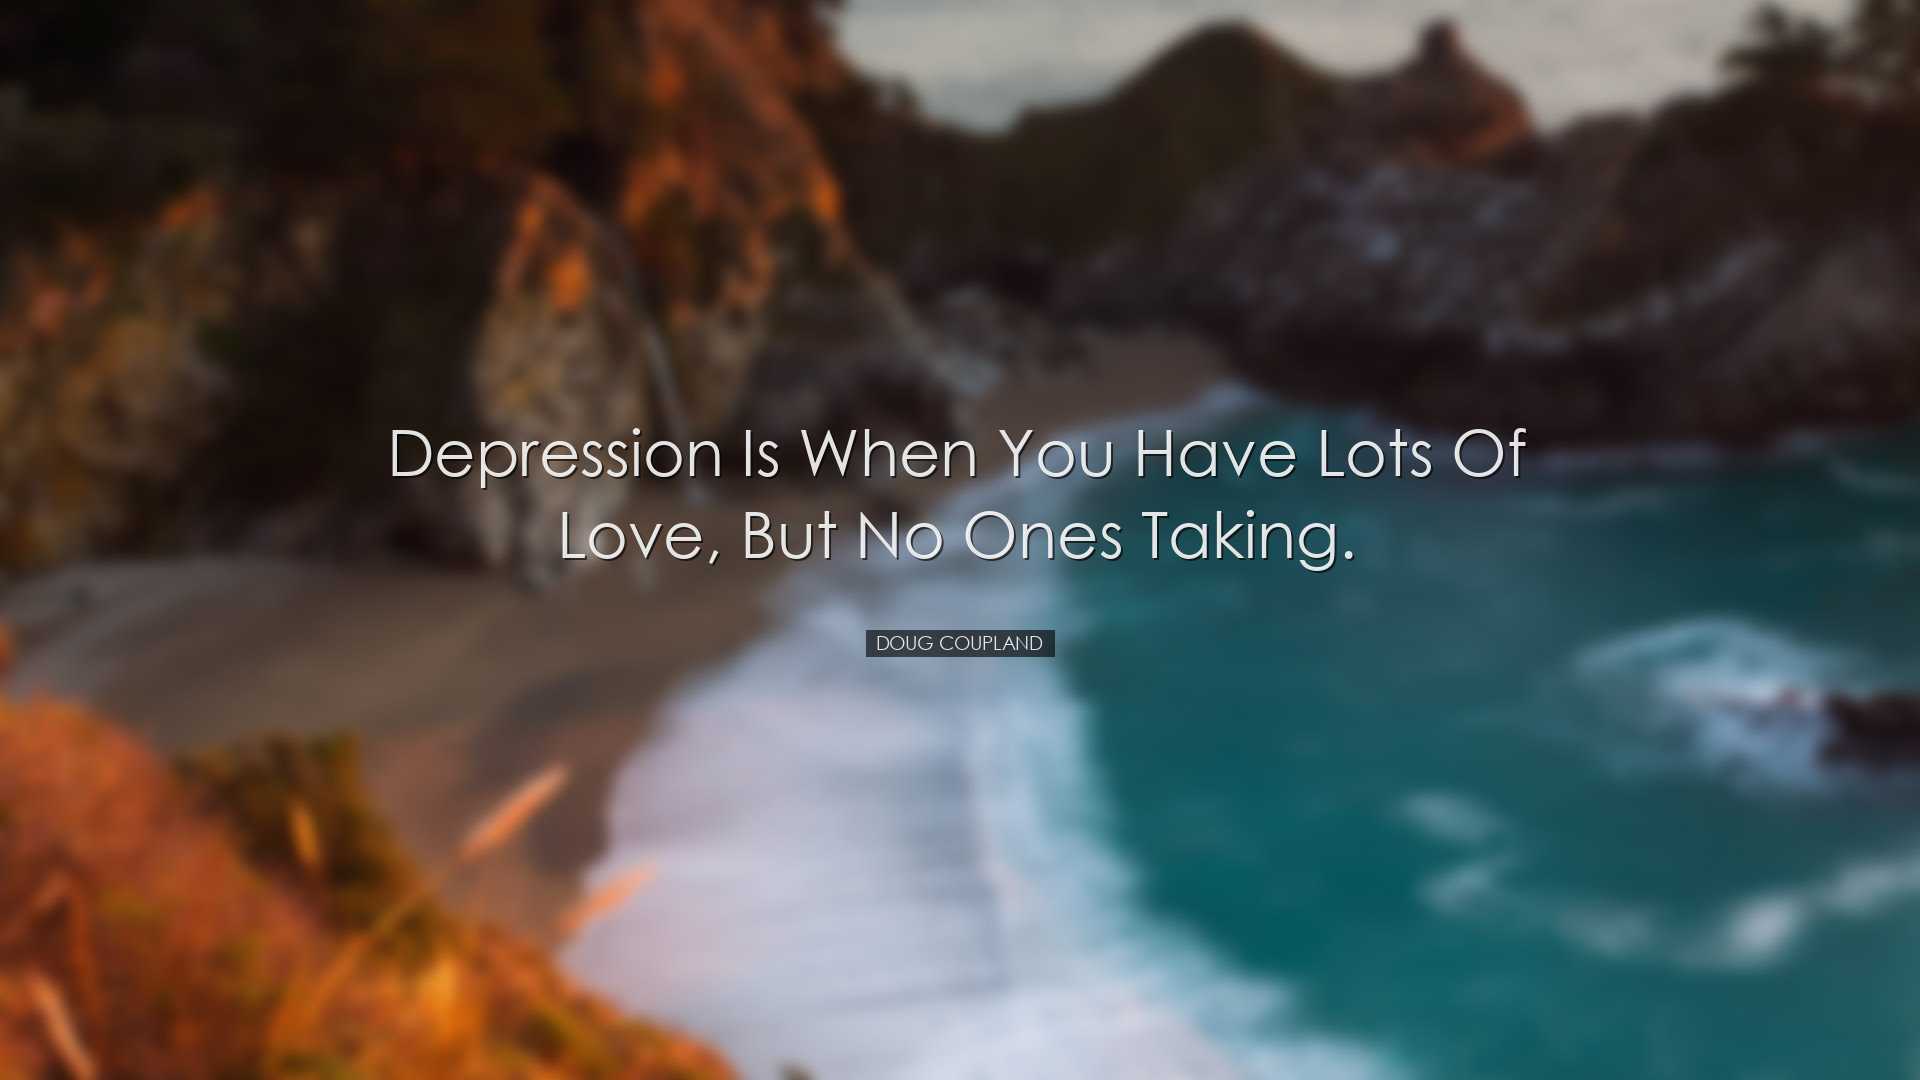 Depression is when you have lots of love, but no ones taking. - Do